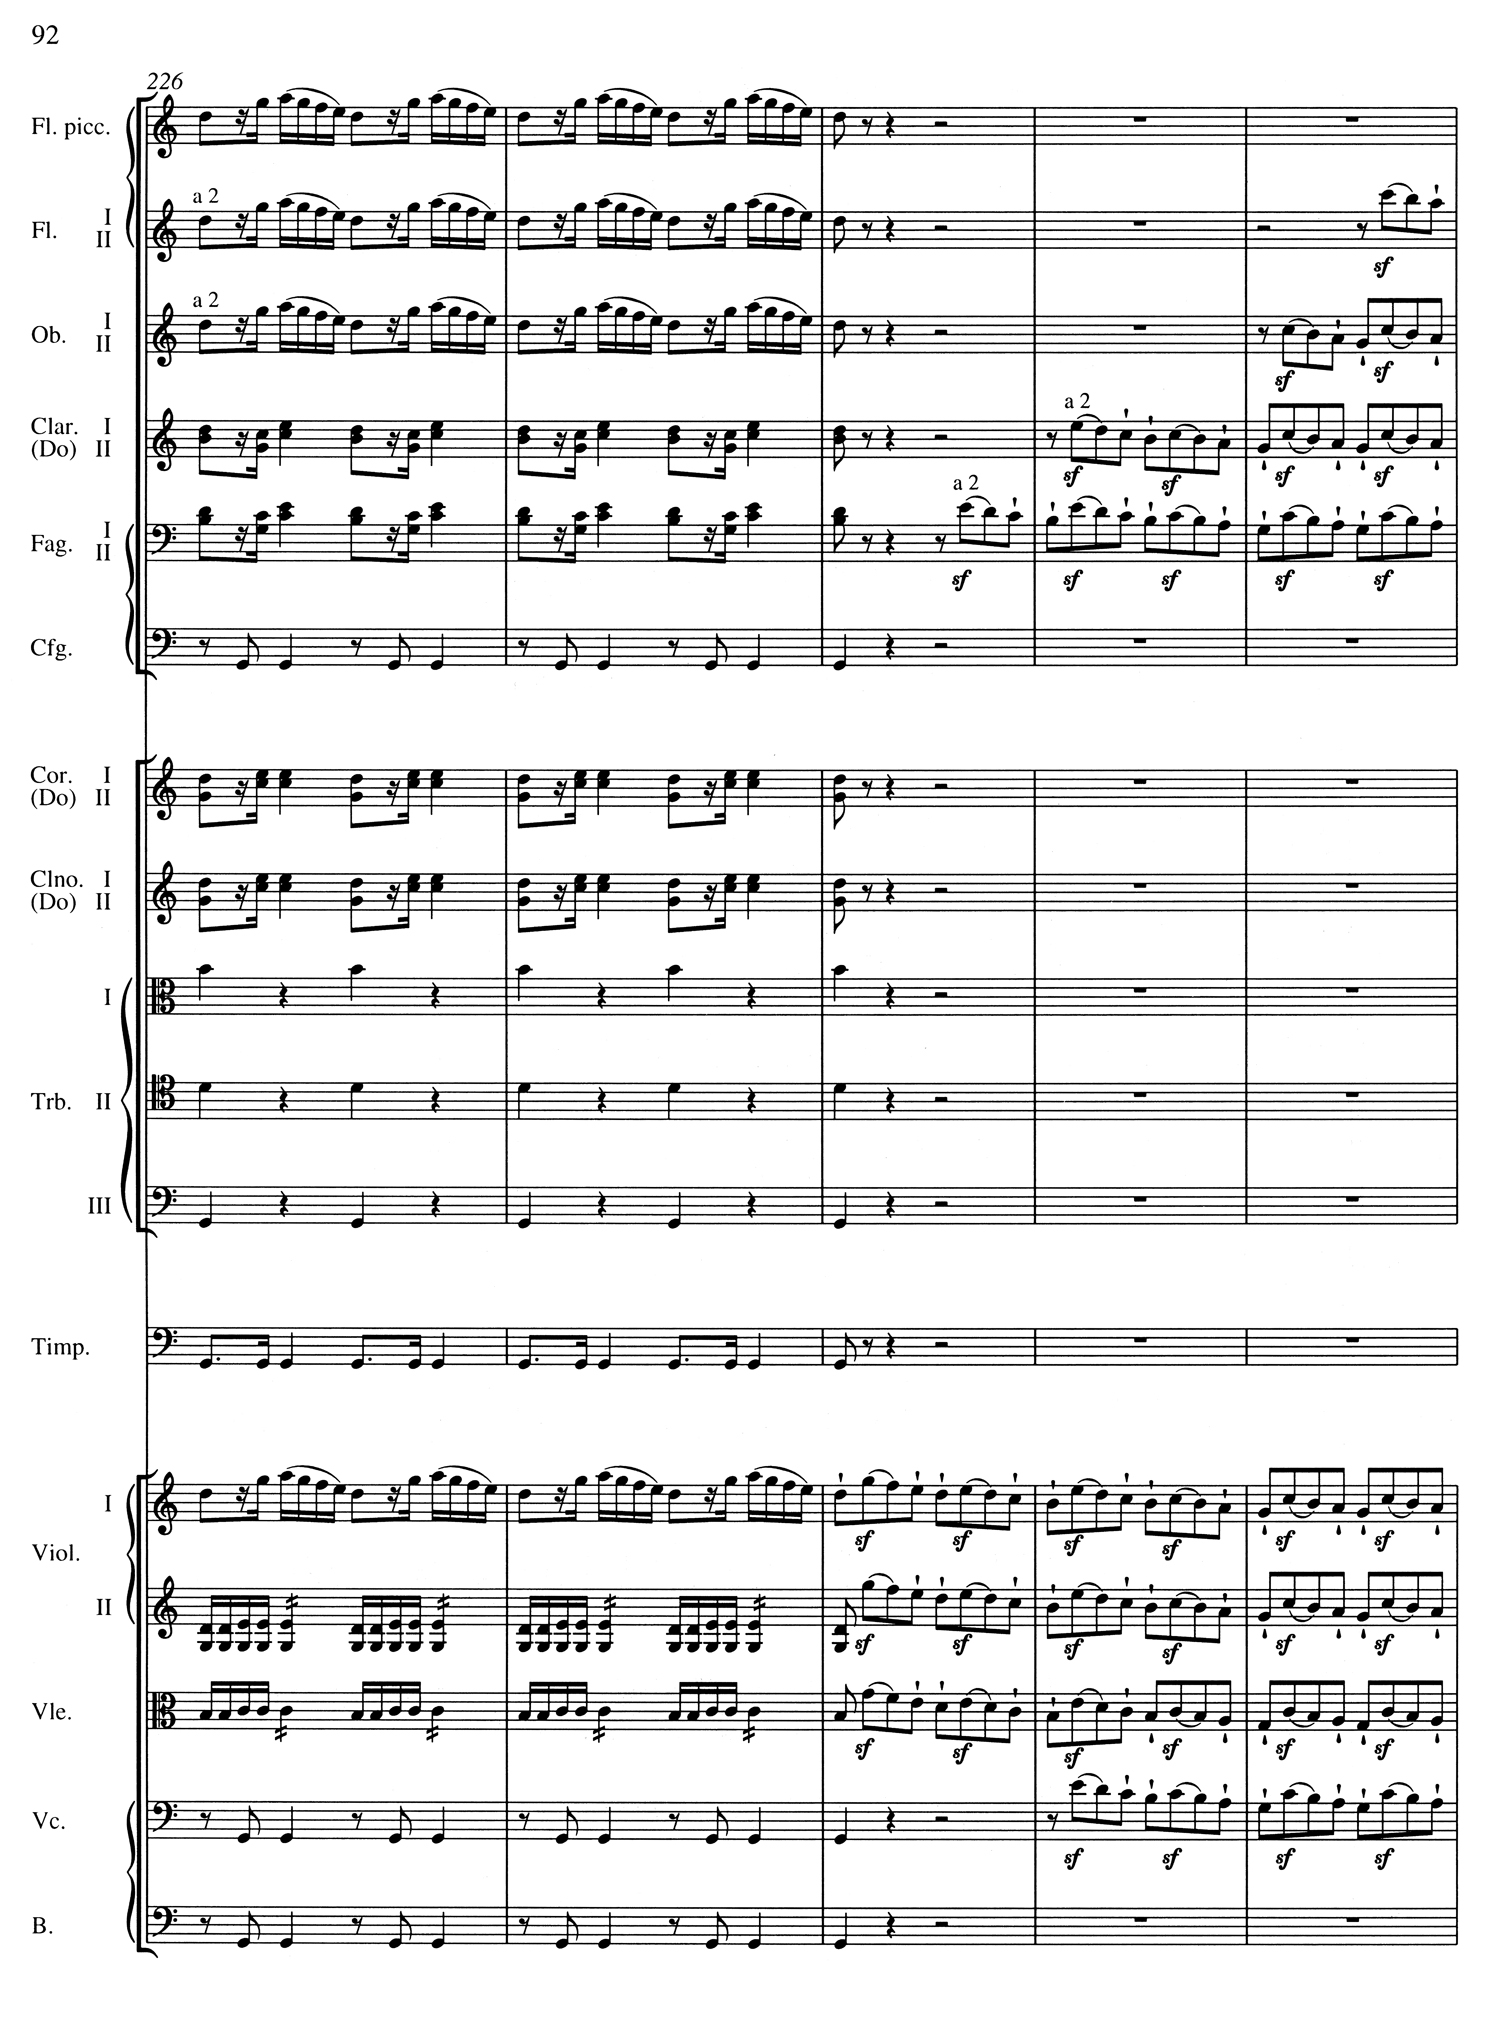 Beethoven 5 Score Page 4.jpg